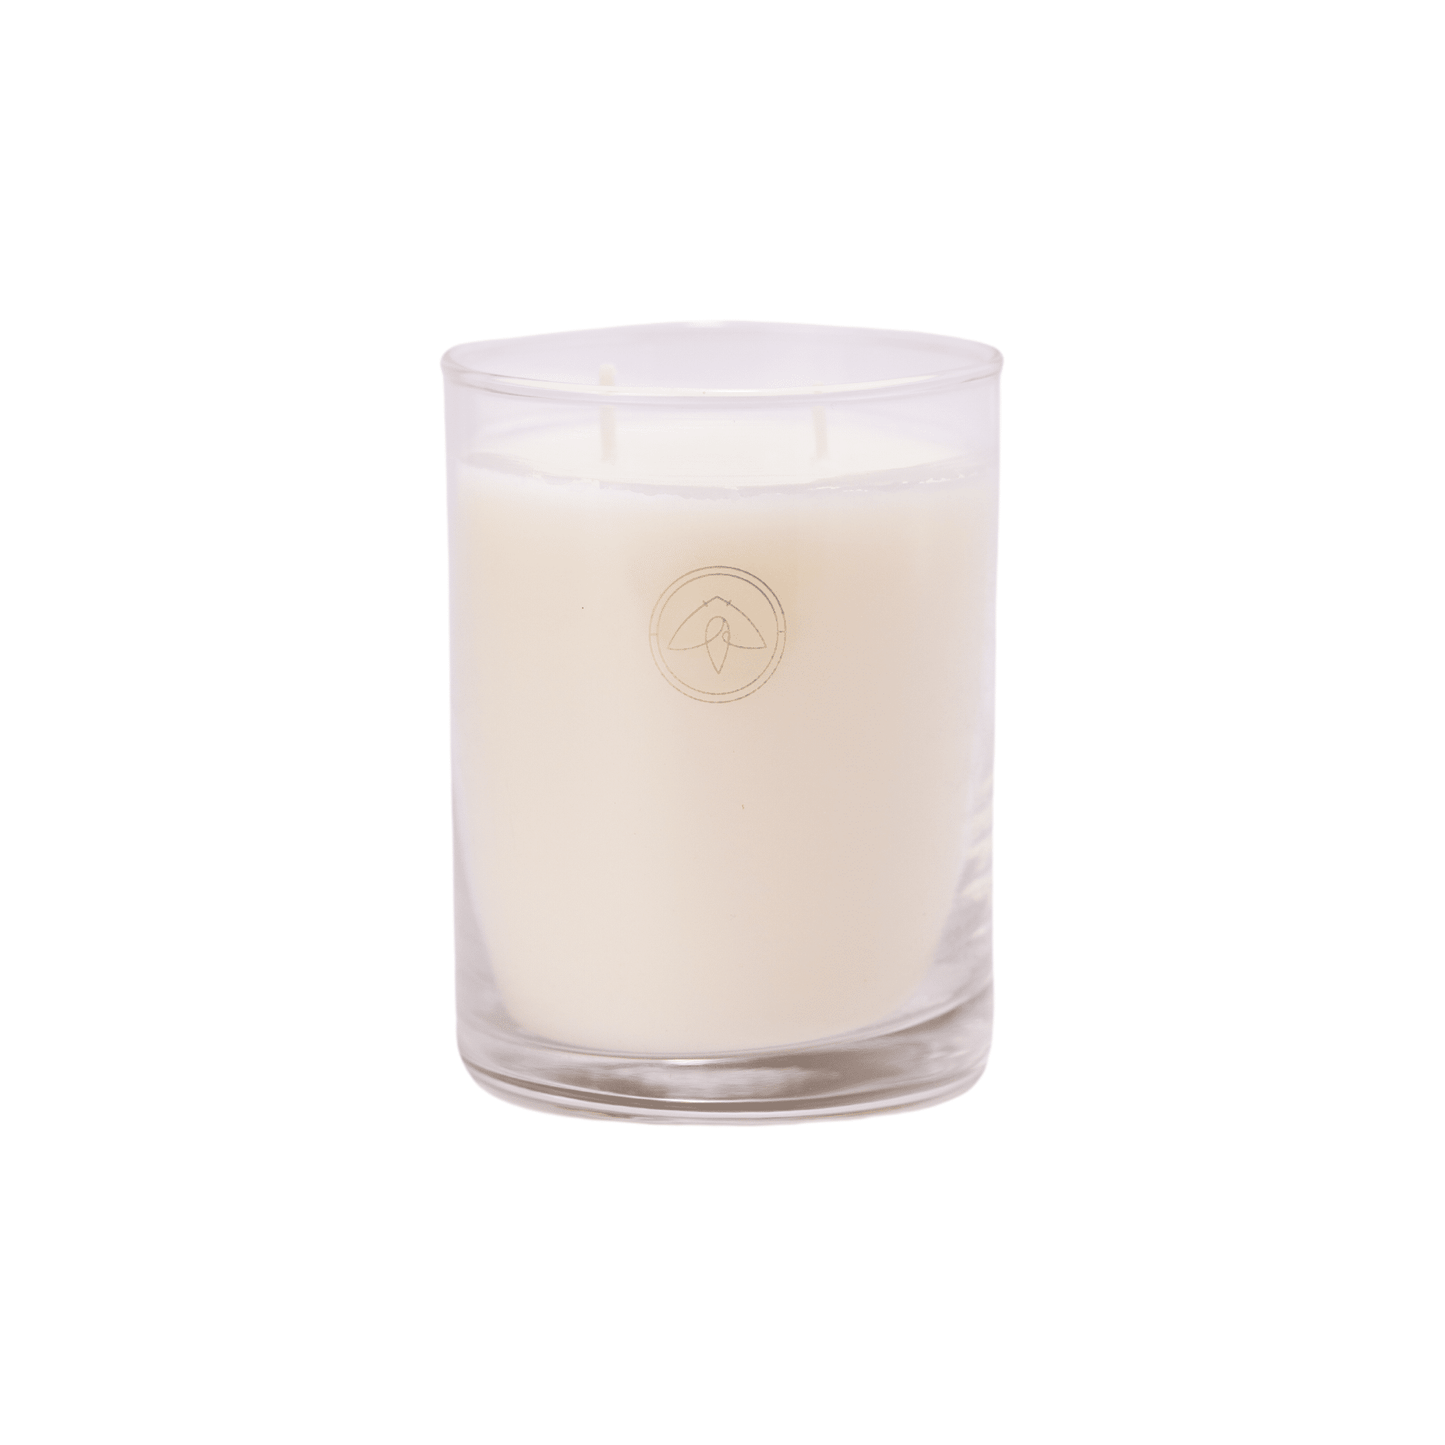 Clarity Enchanted Rose - 10 oz candle in clear glass